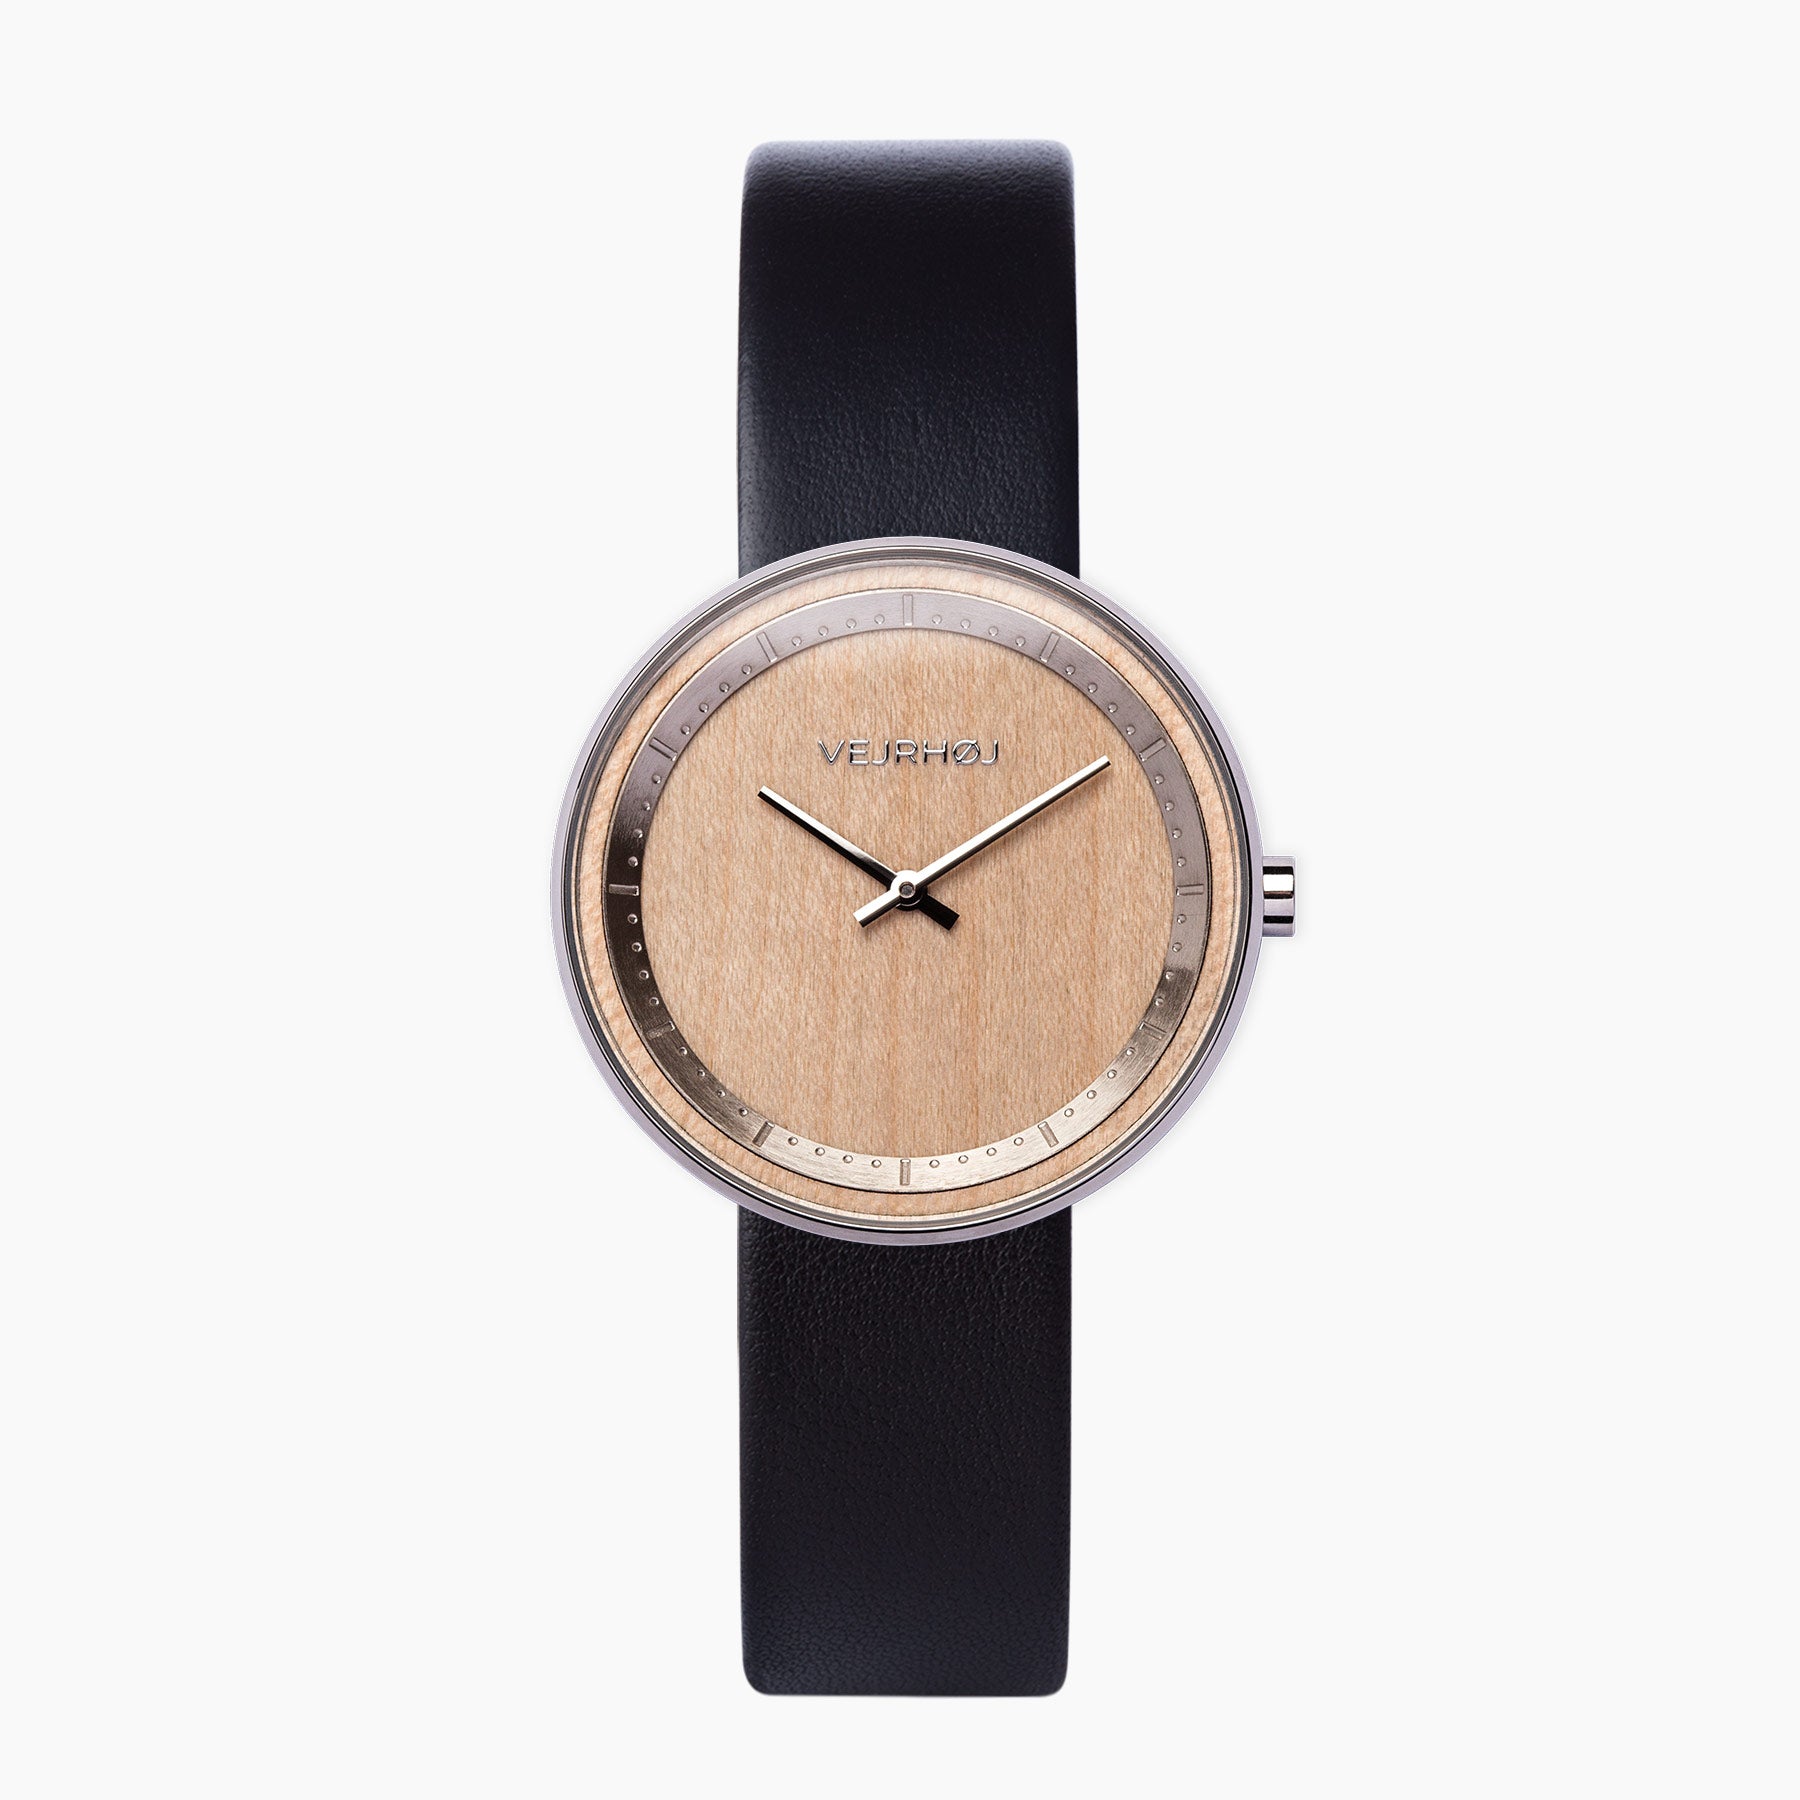 Wooden watch made from maple wood with black straps and steel hands